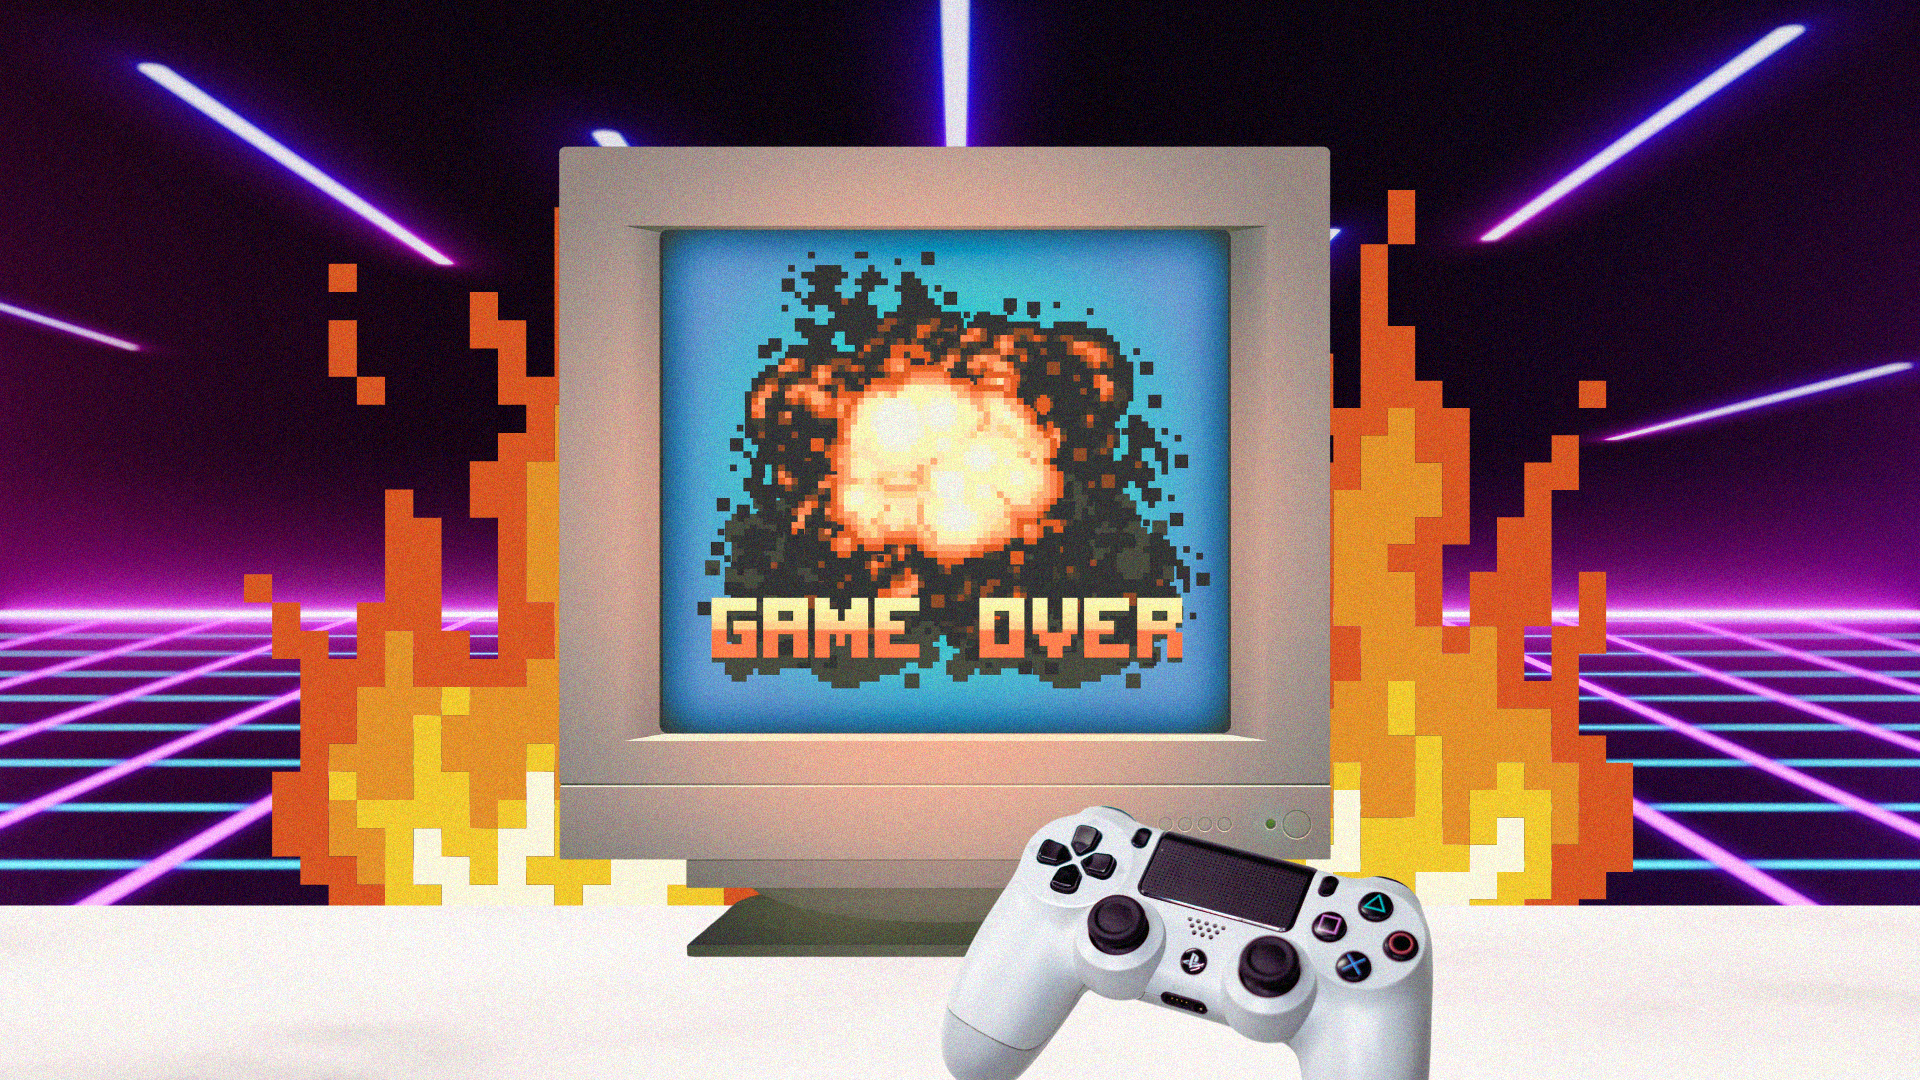 An old school-style video game reads 'Game over' on a screen with explosions in the back, and a Playstation controller in the foreground.